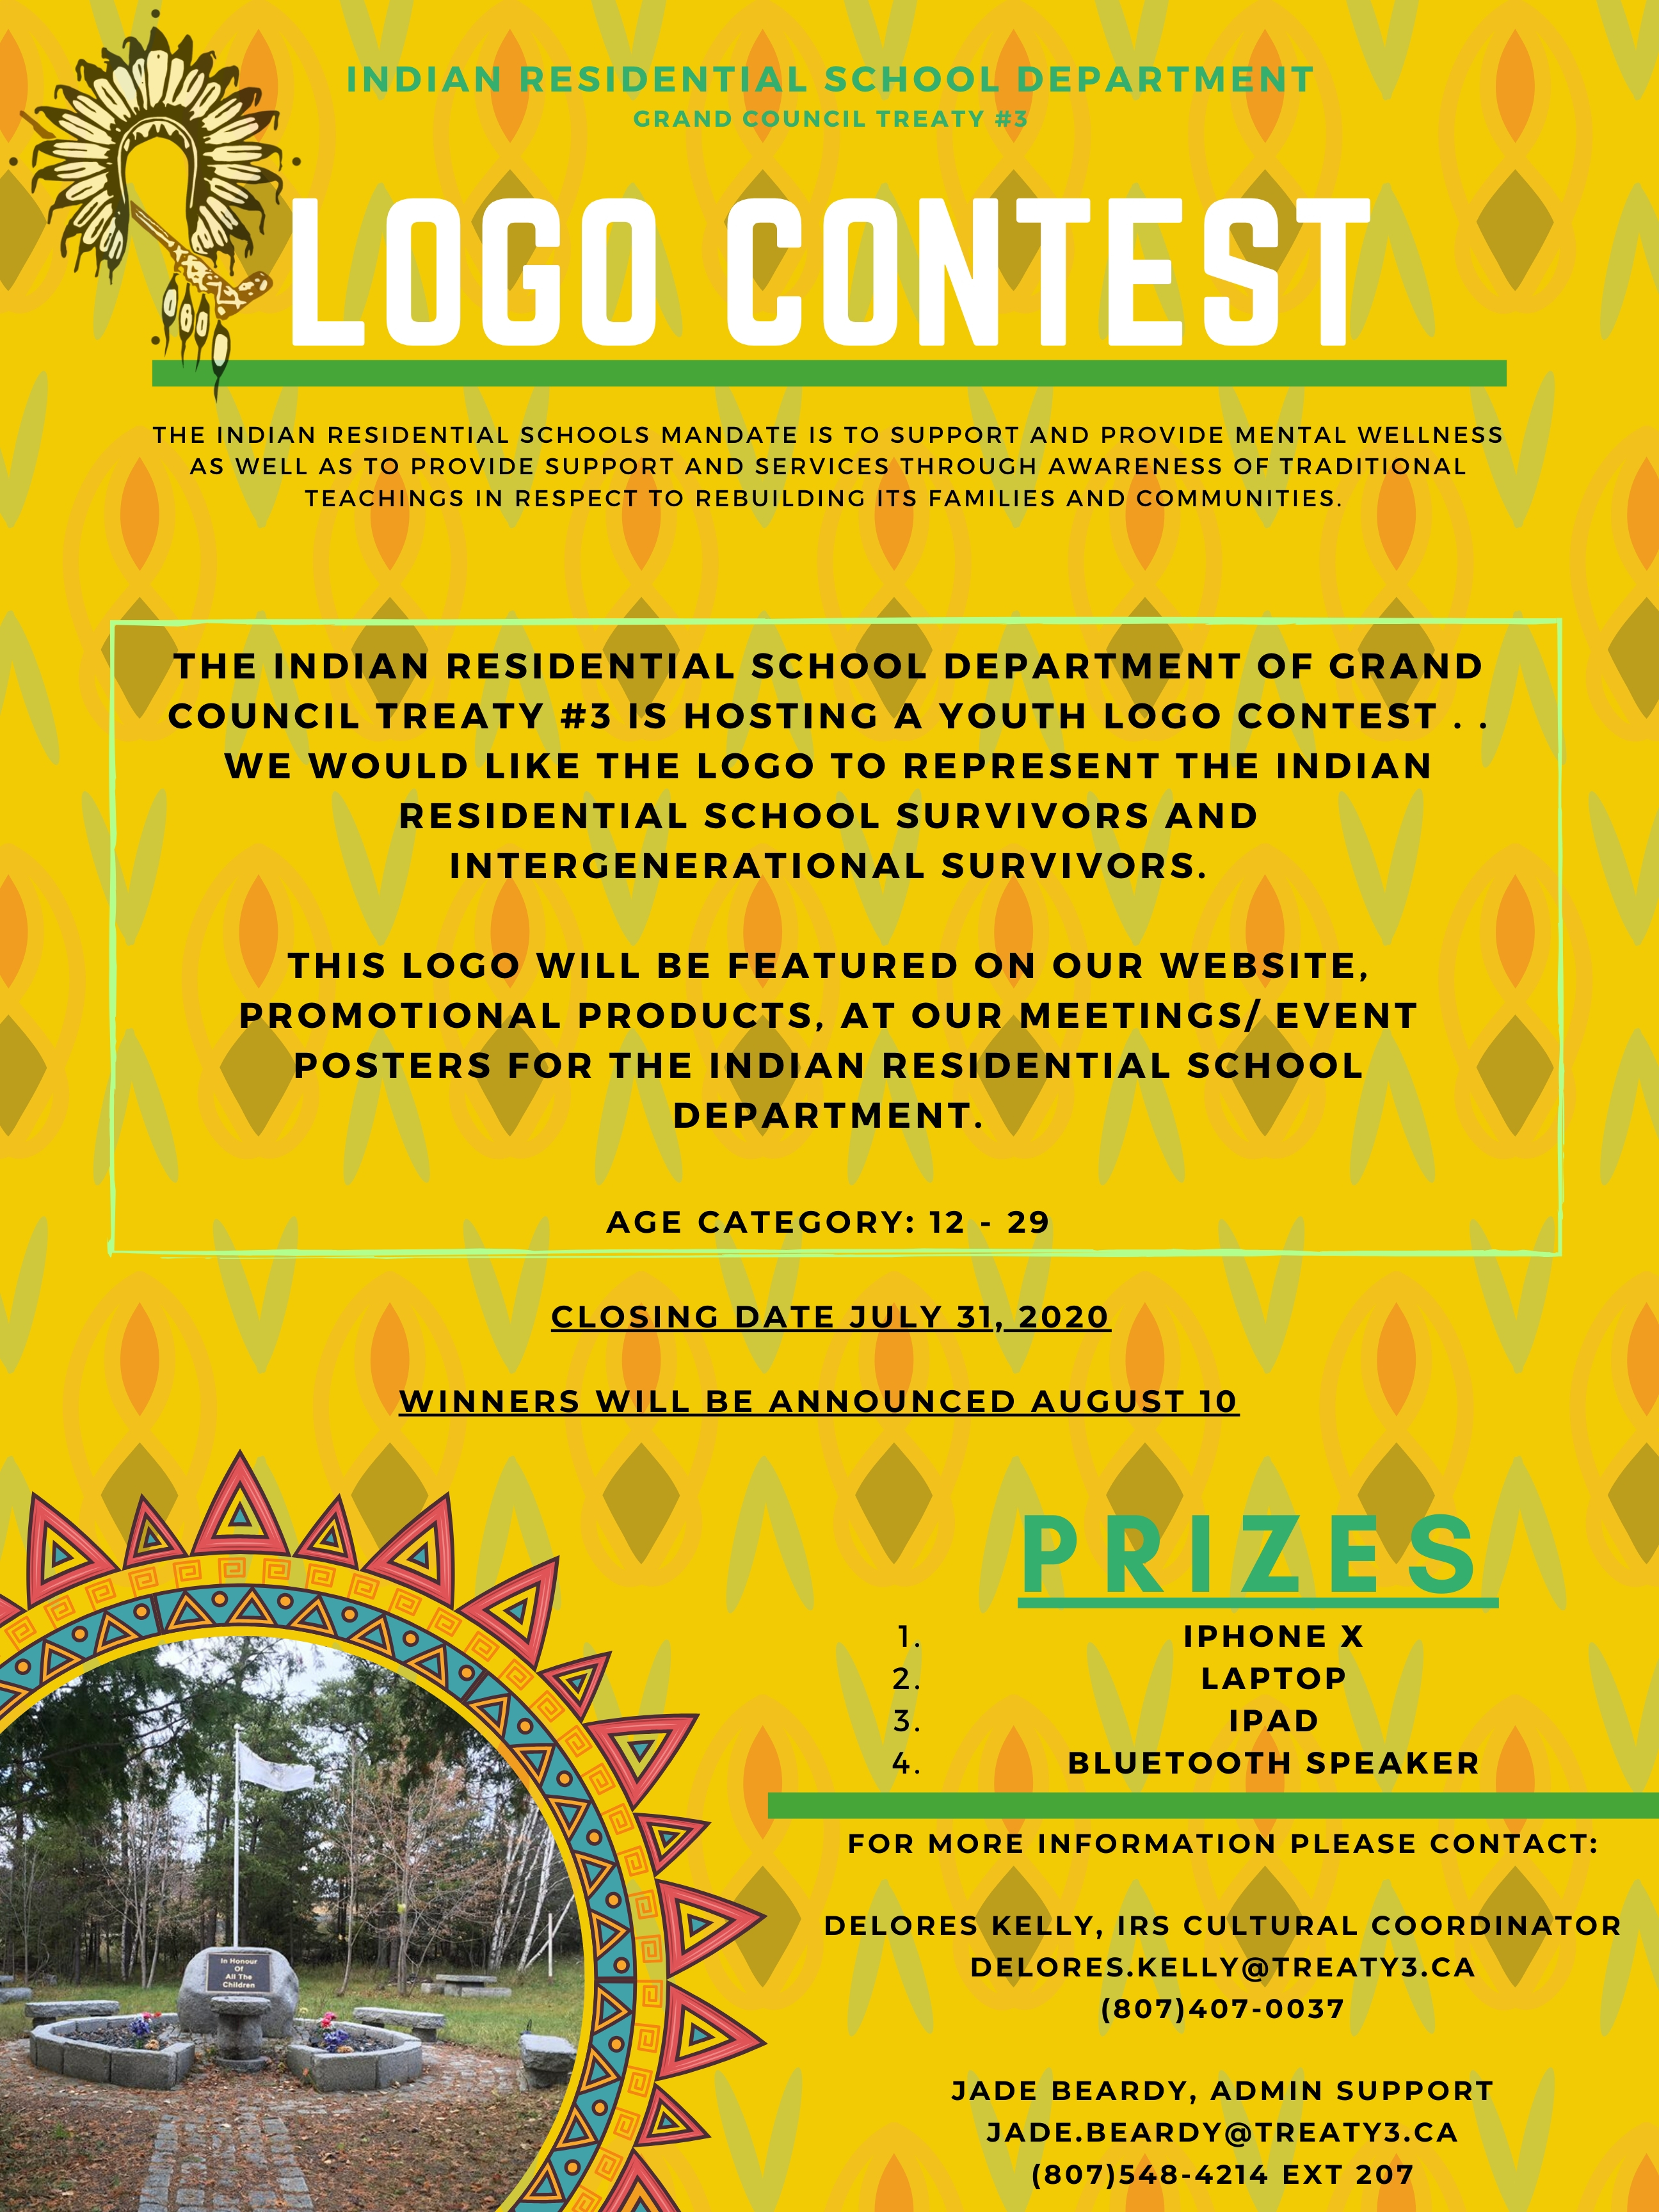 Logo Contest for the GCT3 Indian Residential School Department